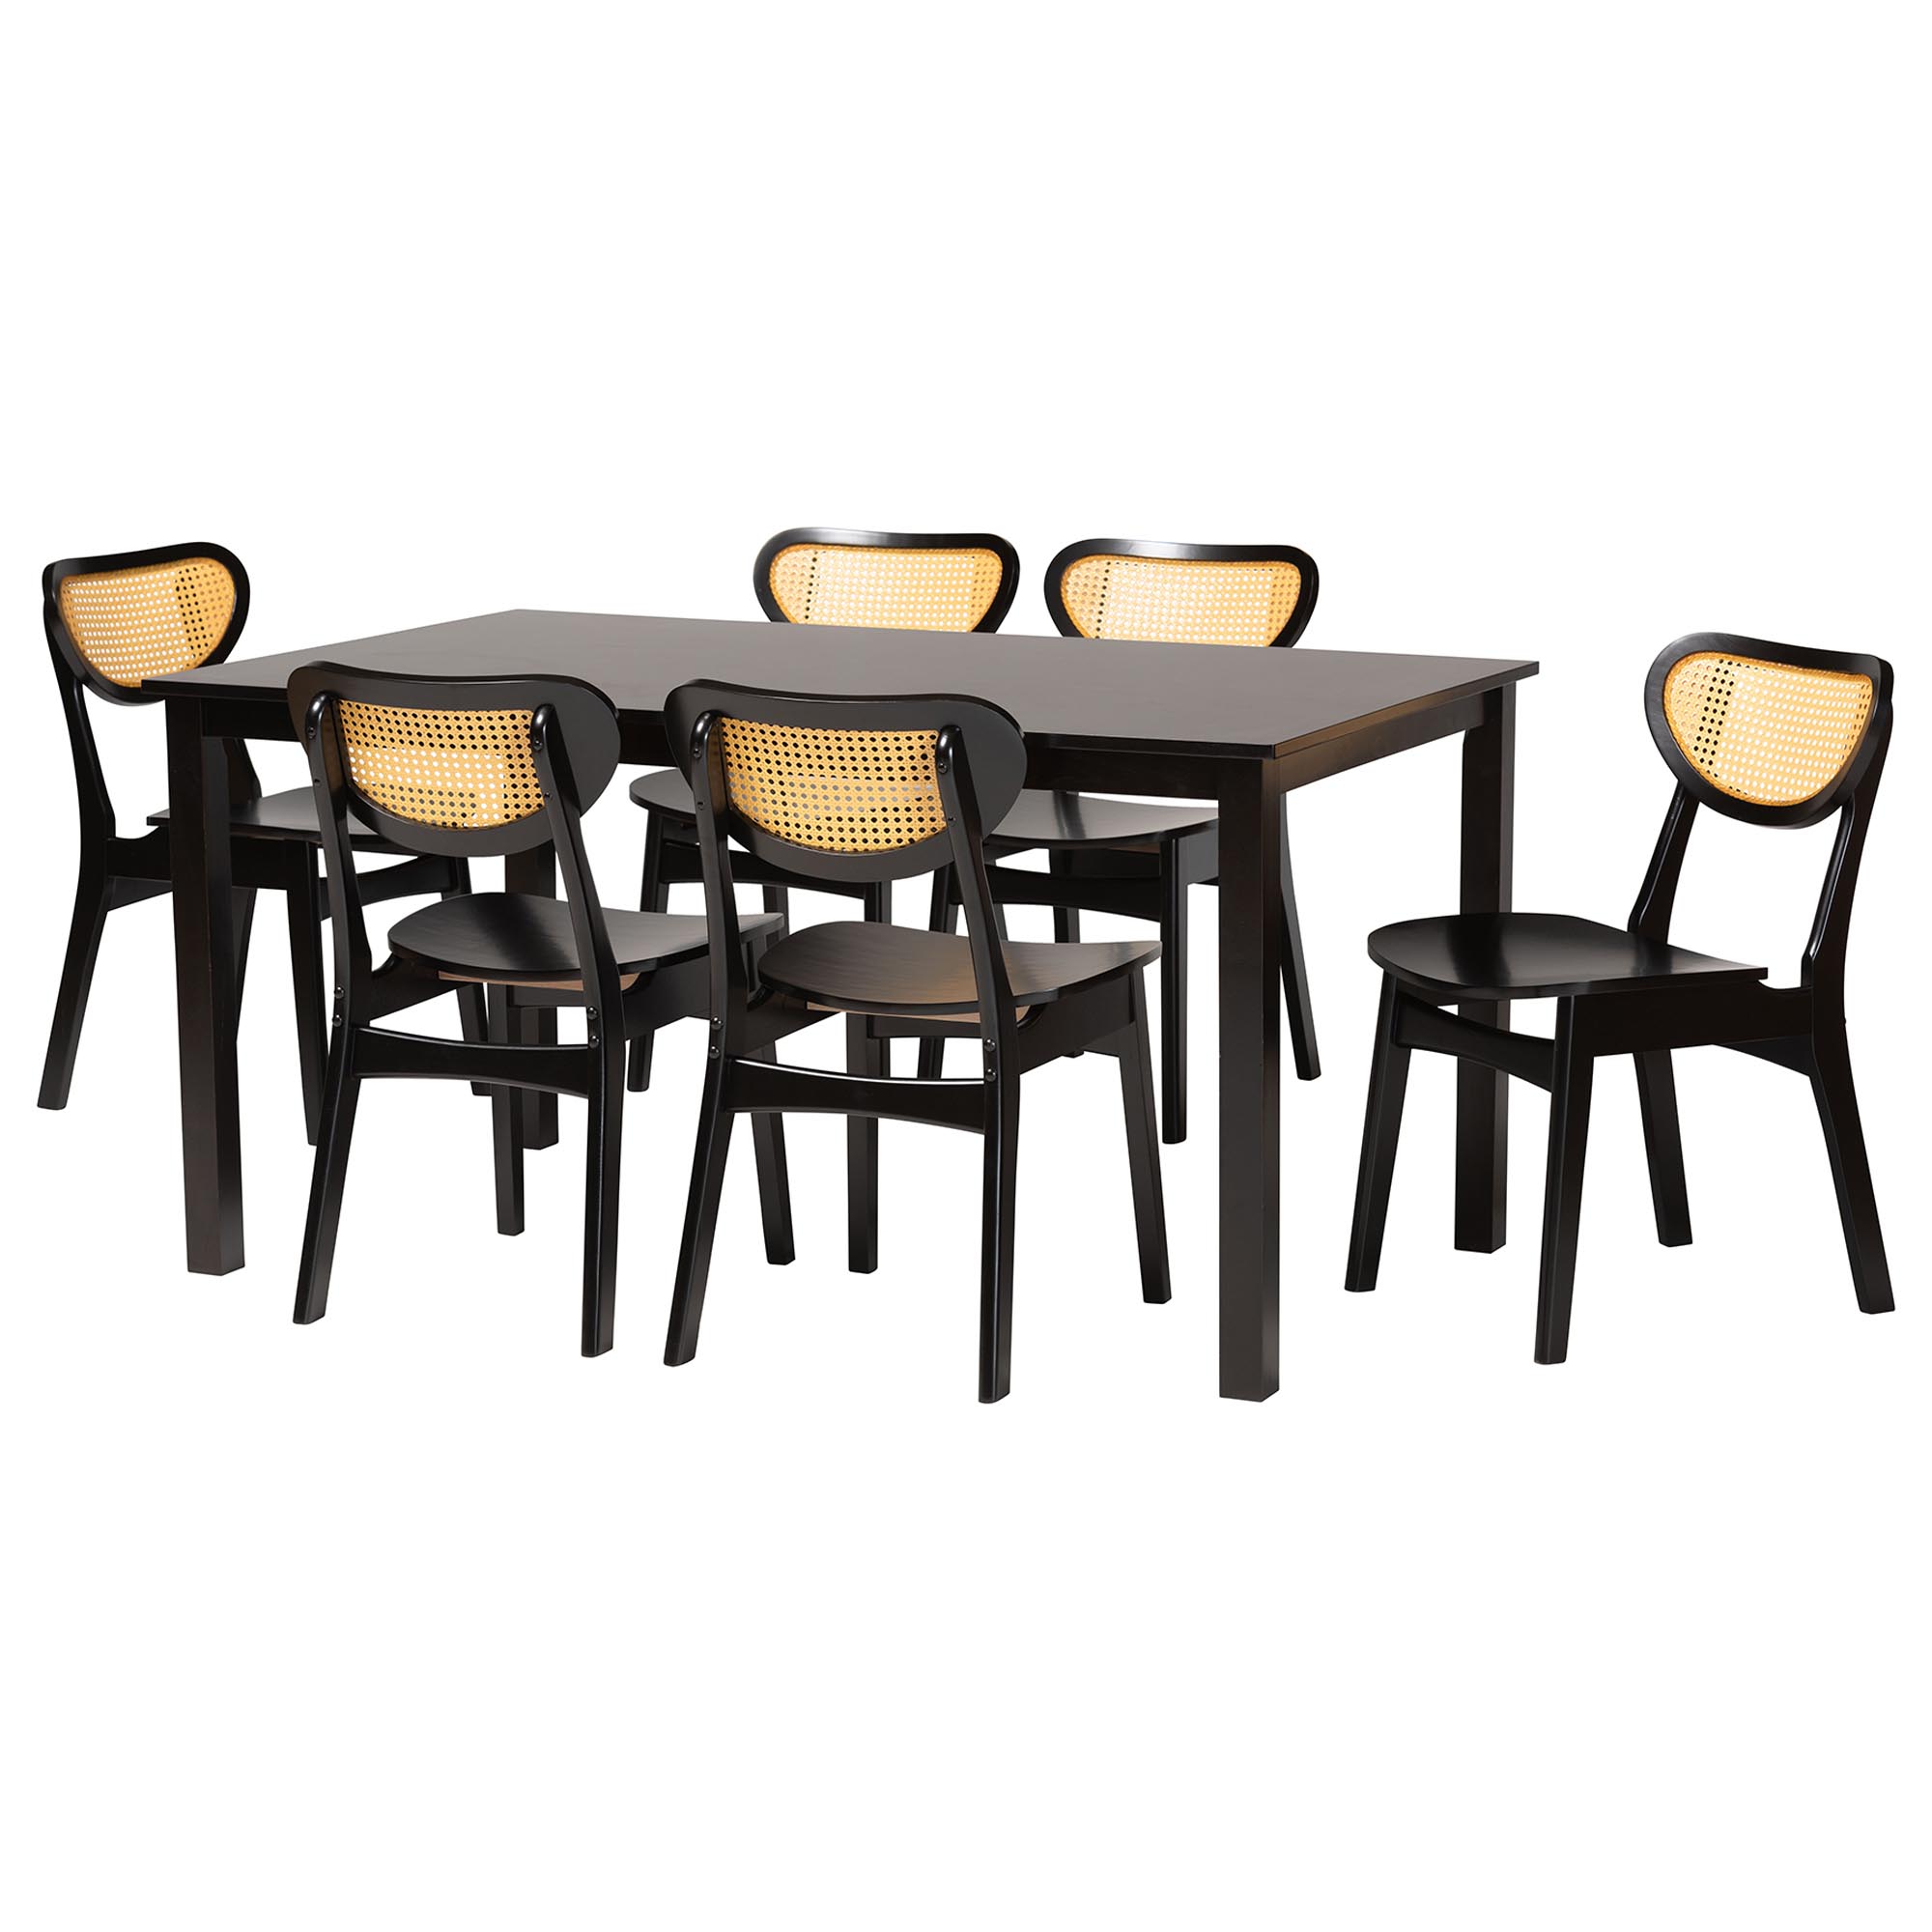 Baxton Studio Jeriah Mid-Century Modern Dark Brown Brown Finished Wood and Woven Rattan 7-Piece Dining Set